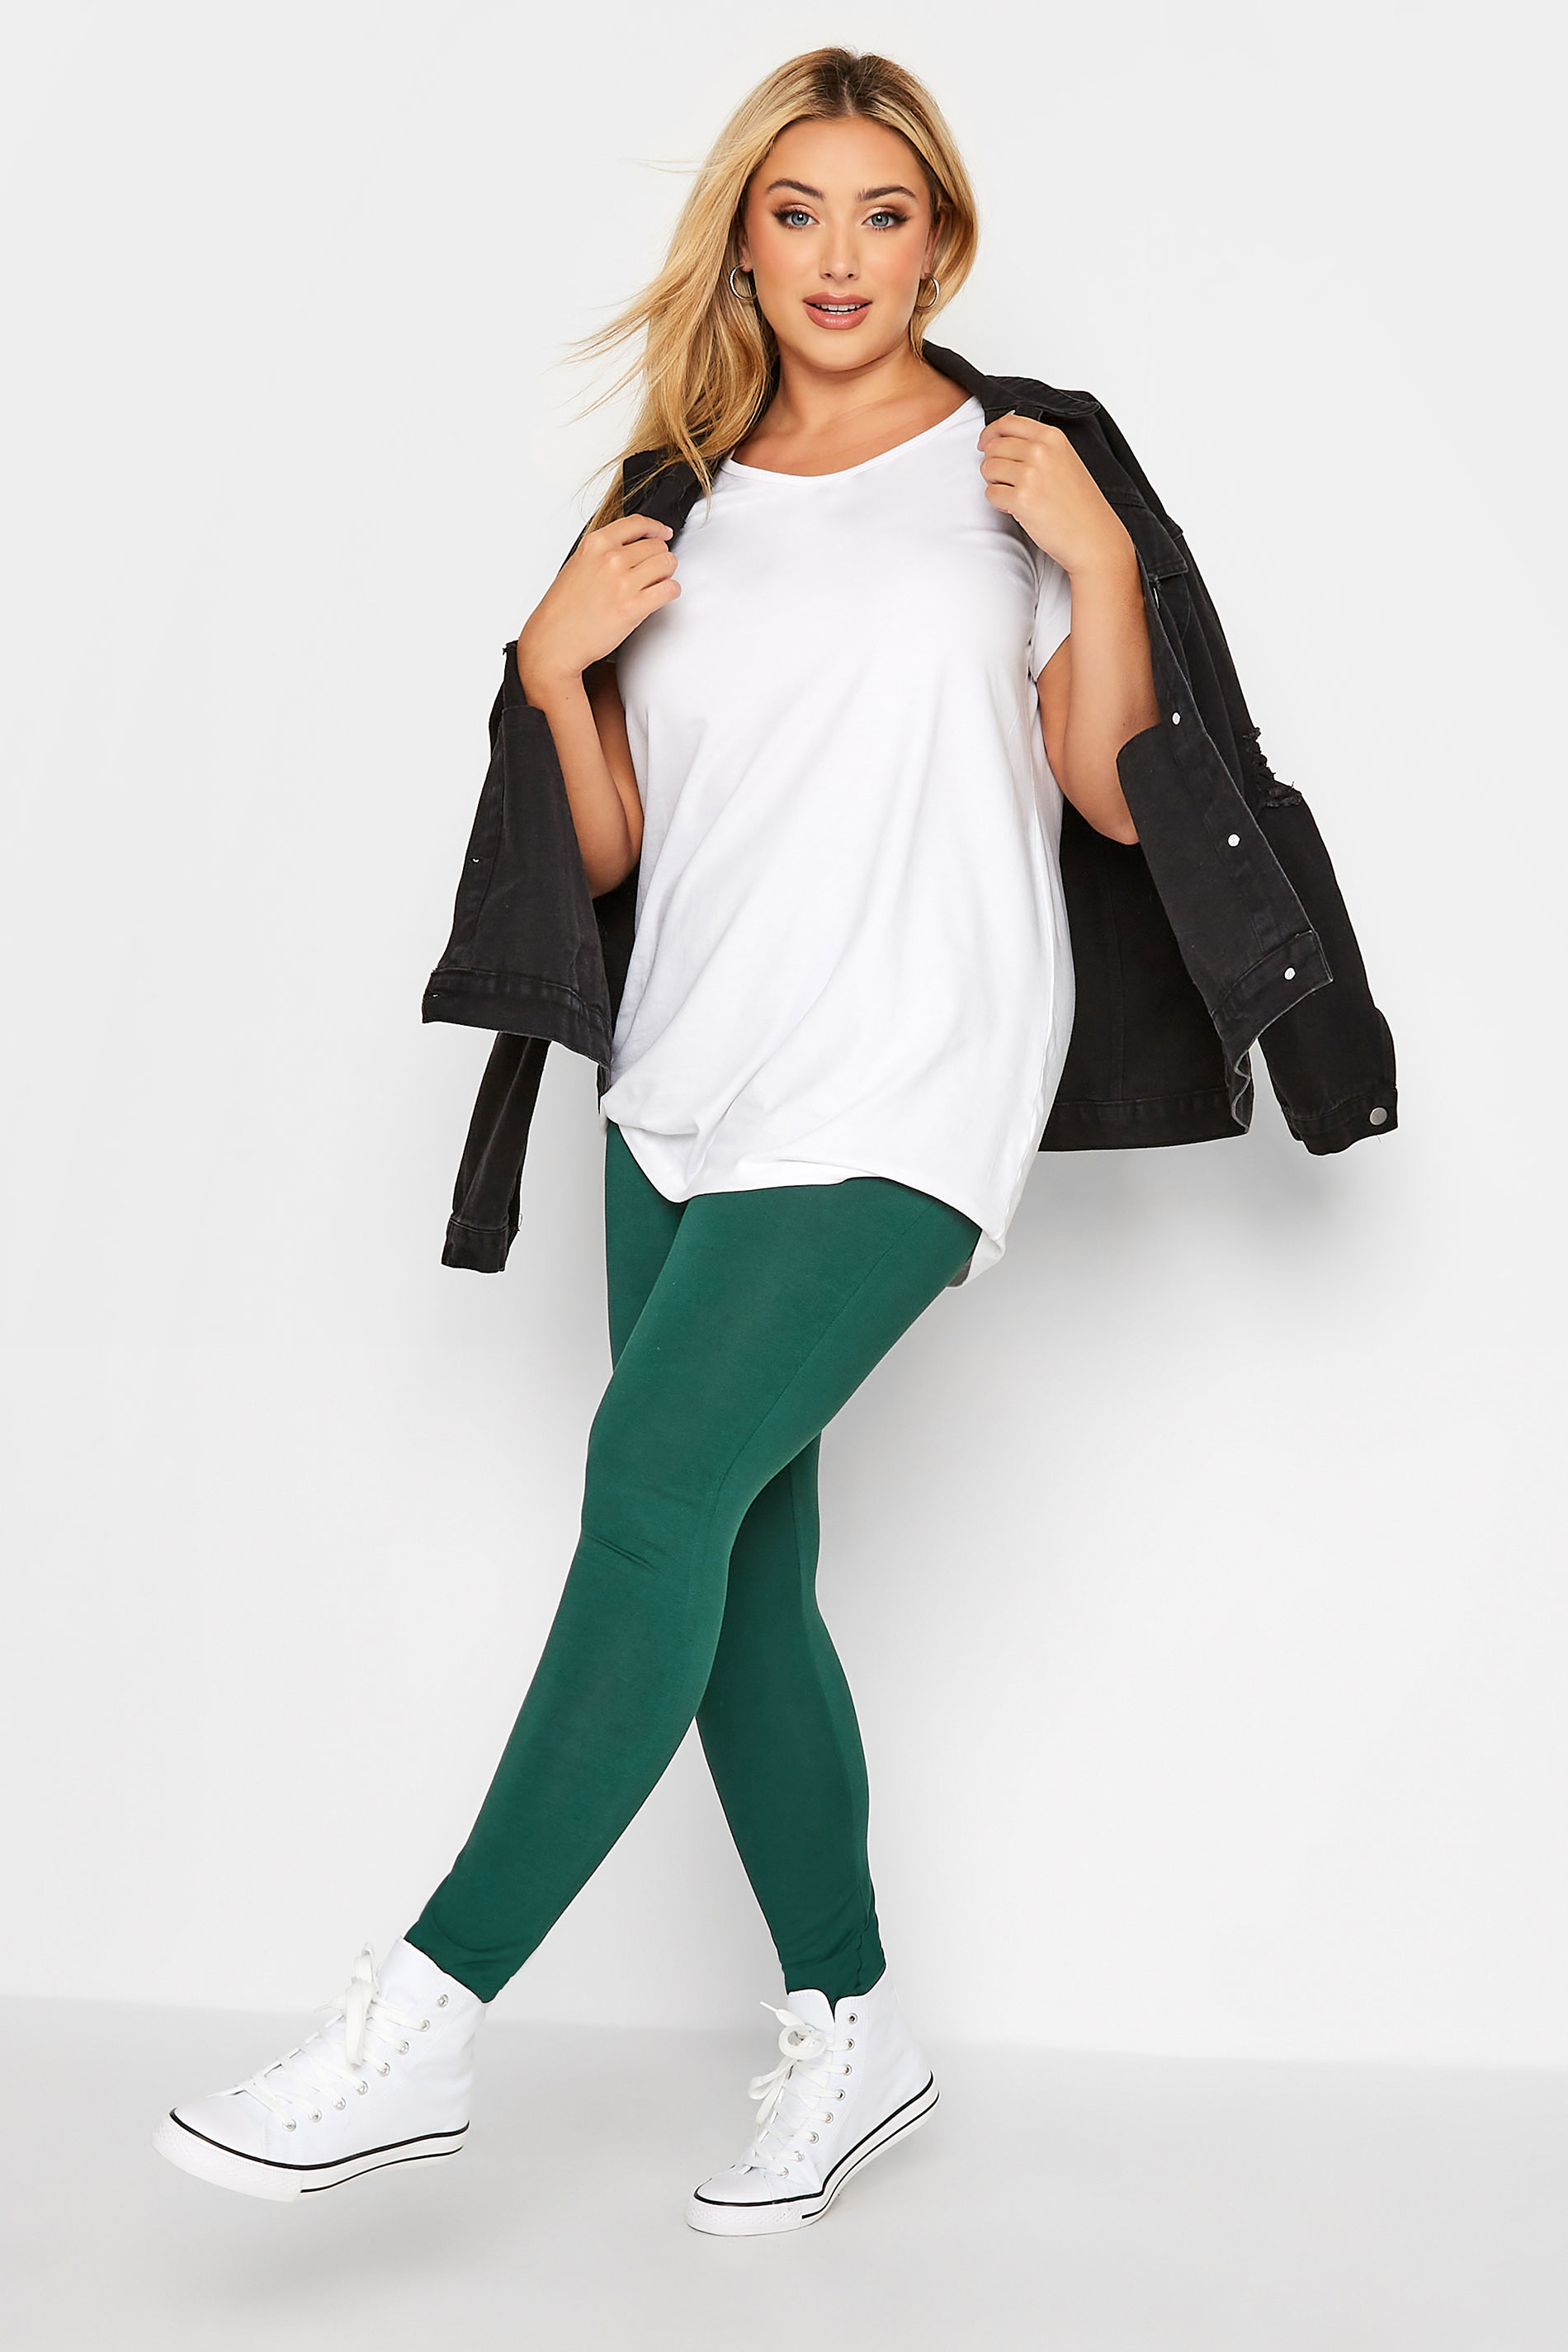 Fun Ways to Mix Things Up at Home and Save Big on Loungewear, Activewear,  Home Decor, and More from tjmaxx.com | Outfits with leggings, Tunic outfit, Green  leggings outfit